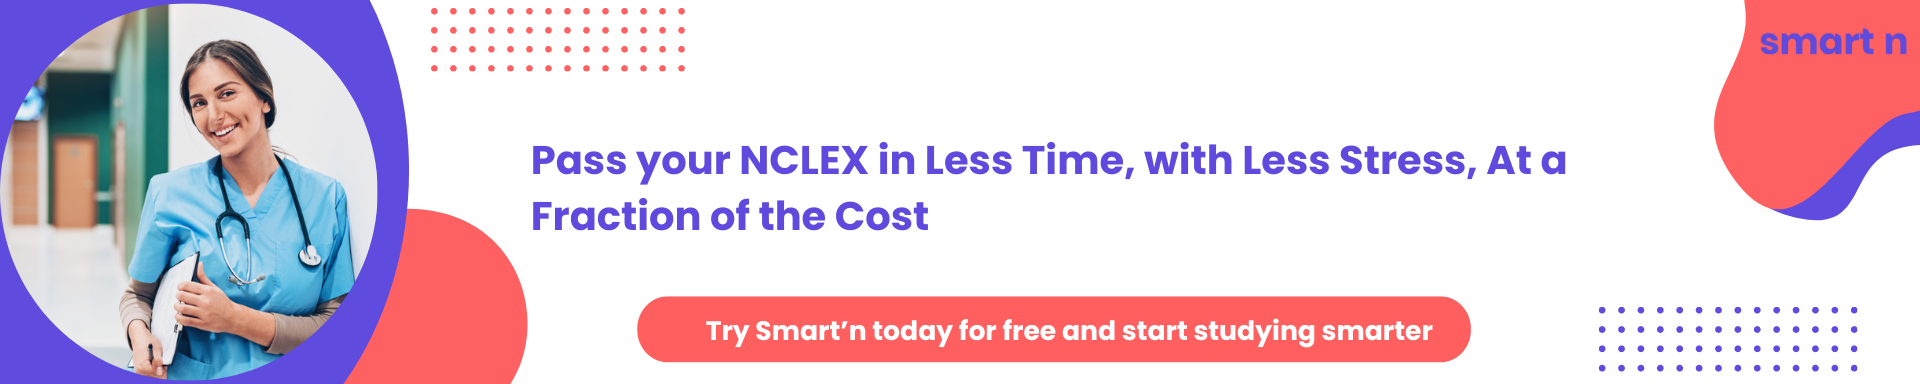 ass your NCLEX in less time, with less stress, at a fraction of the cost